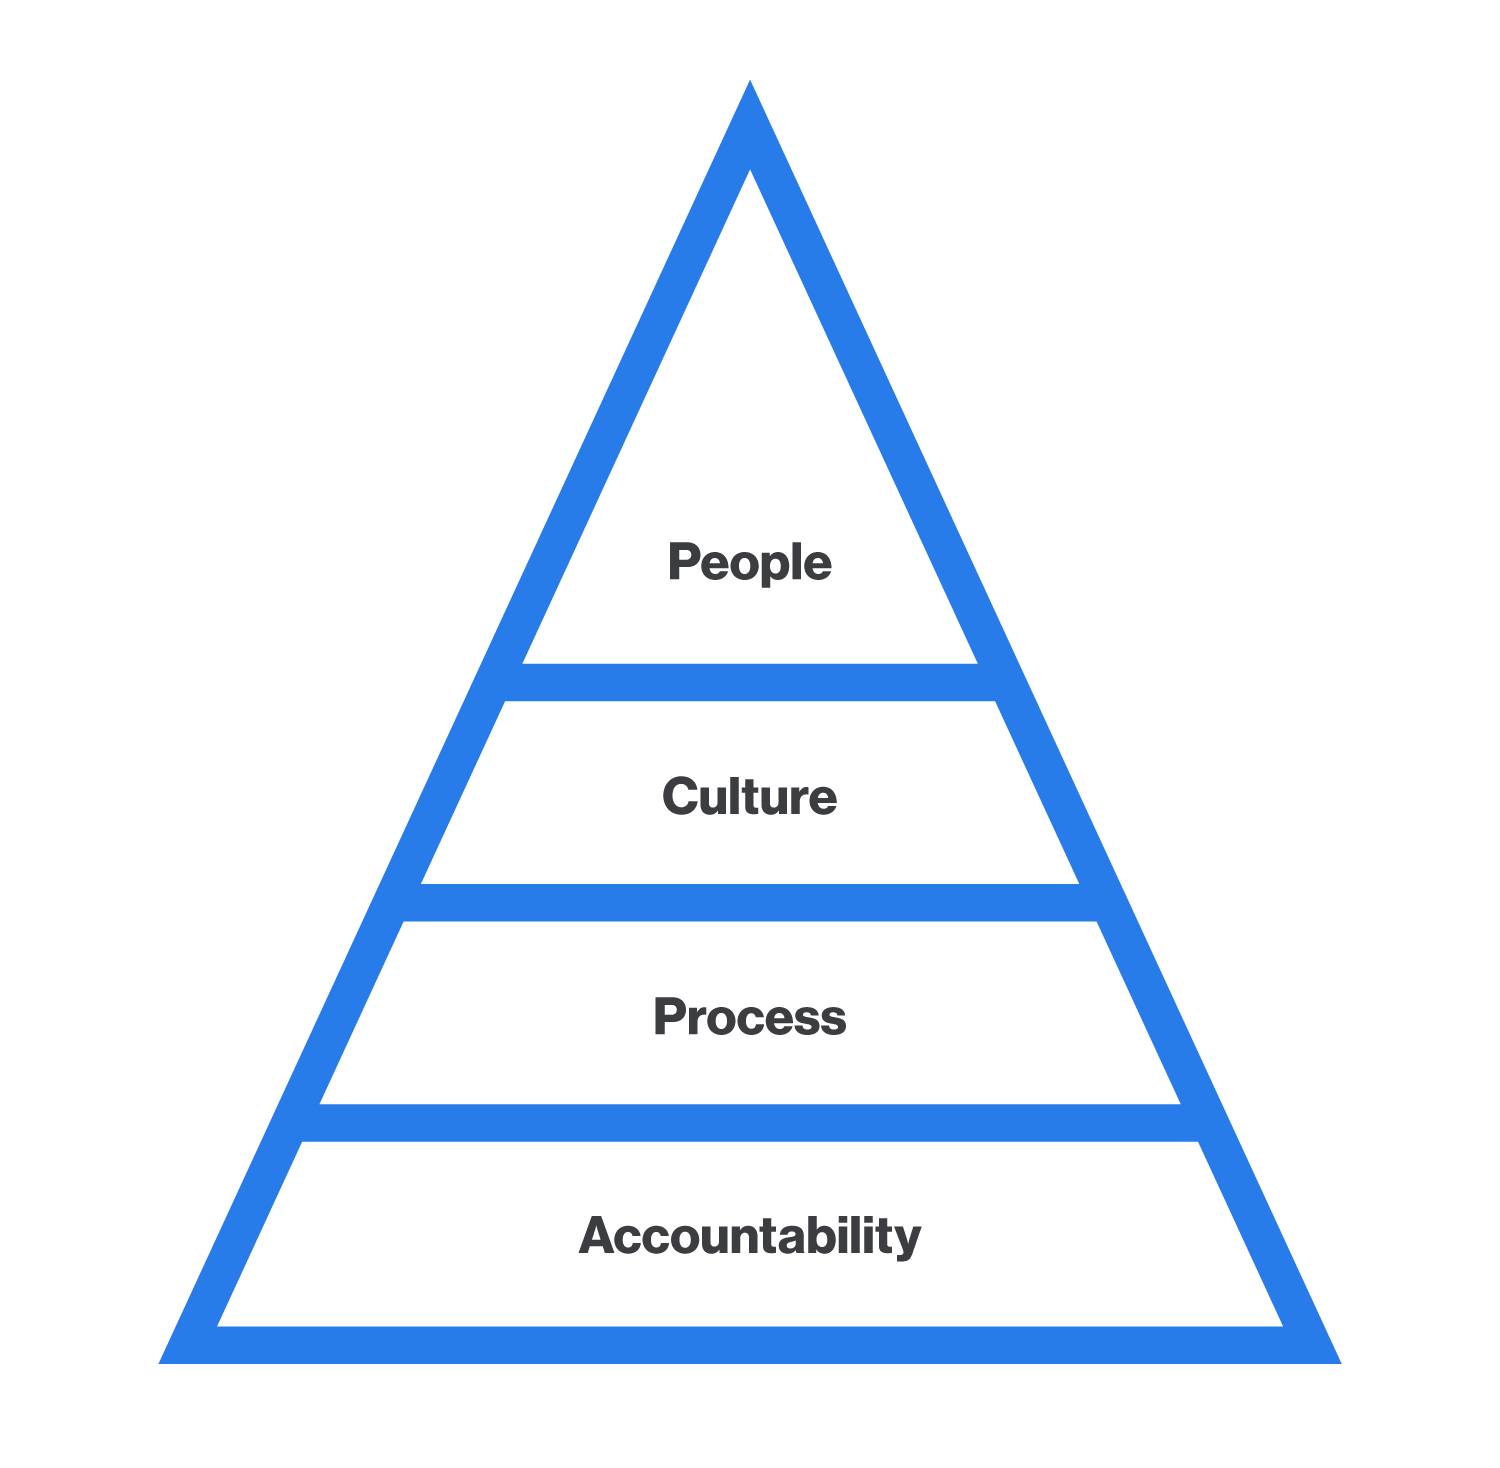 What is Lean Startup? People. Culture. Process. Accountability. 